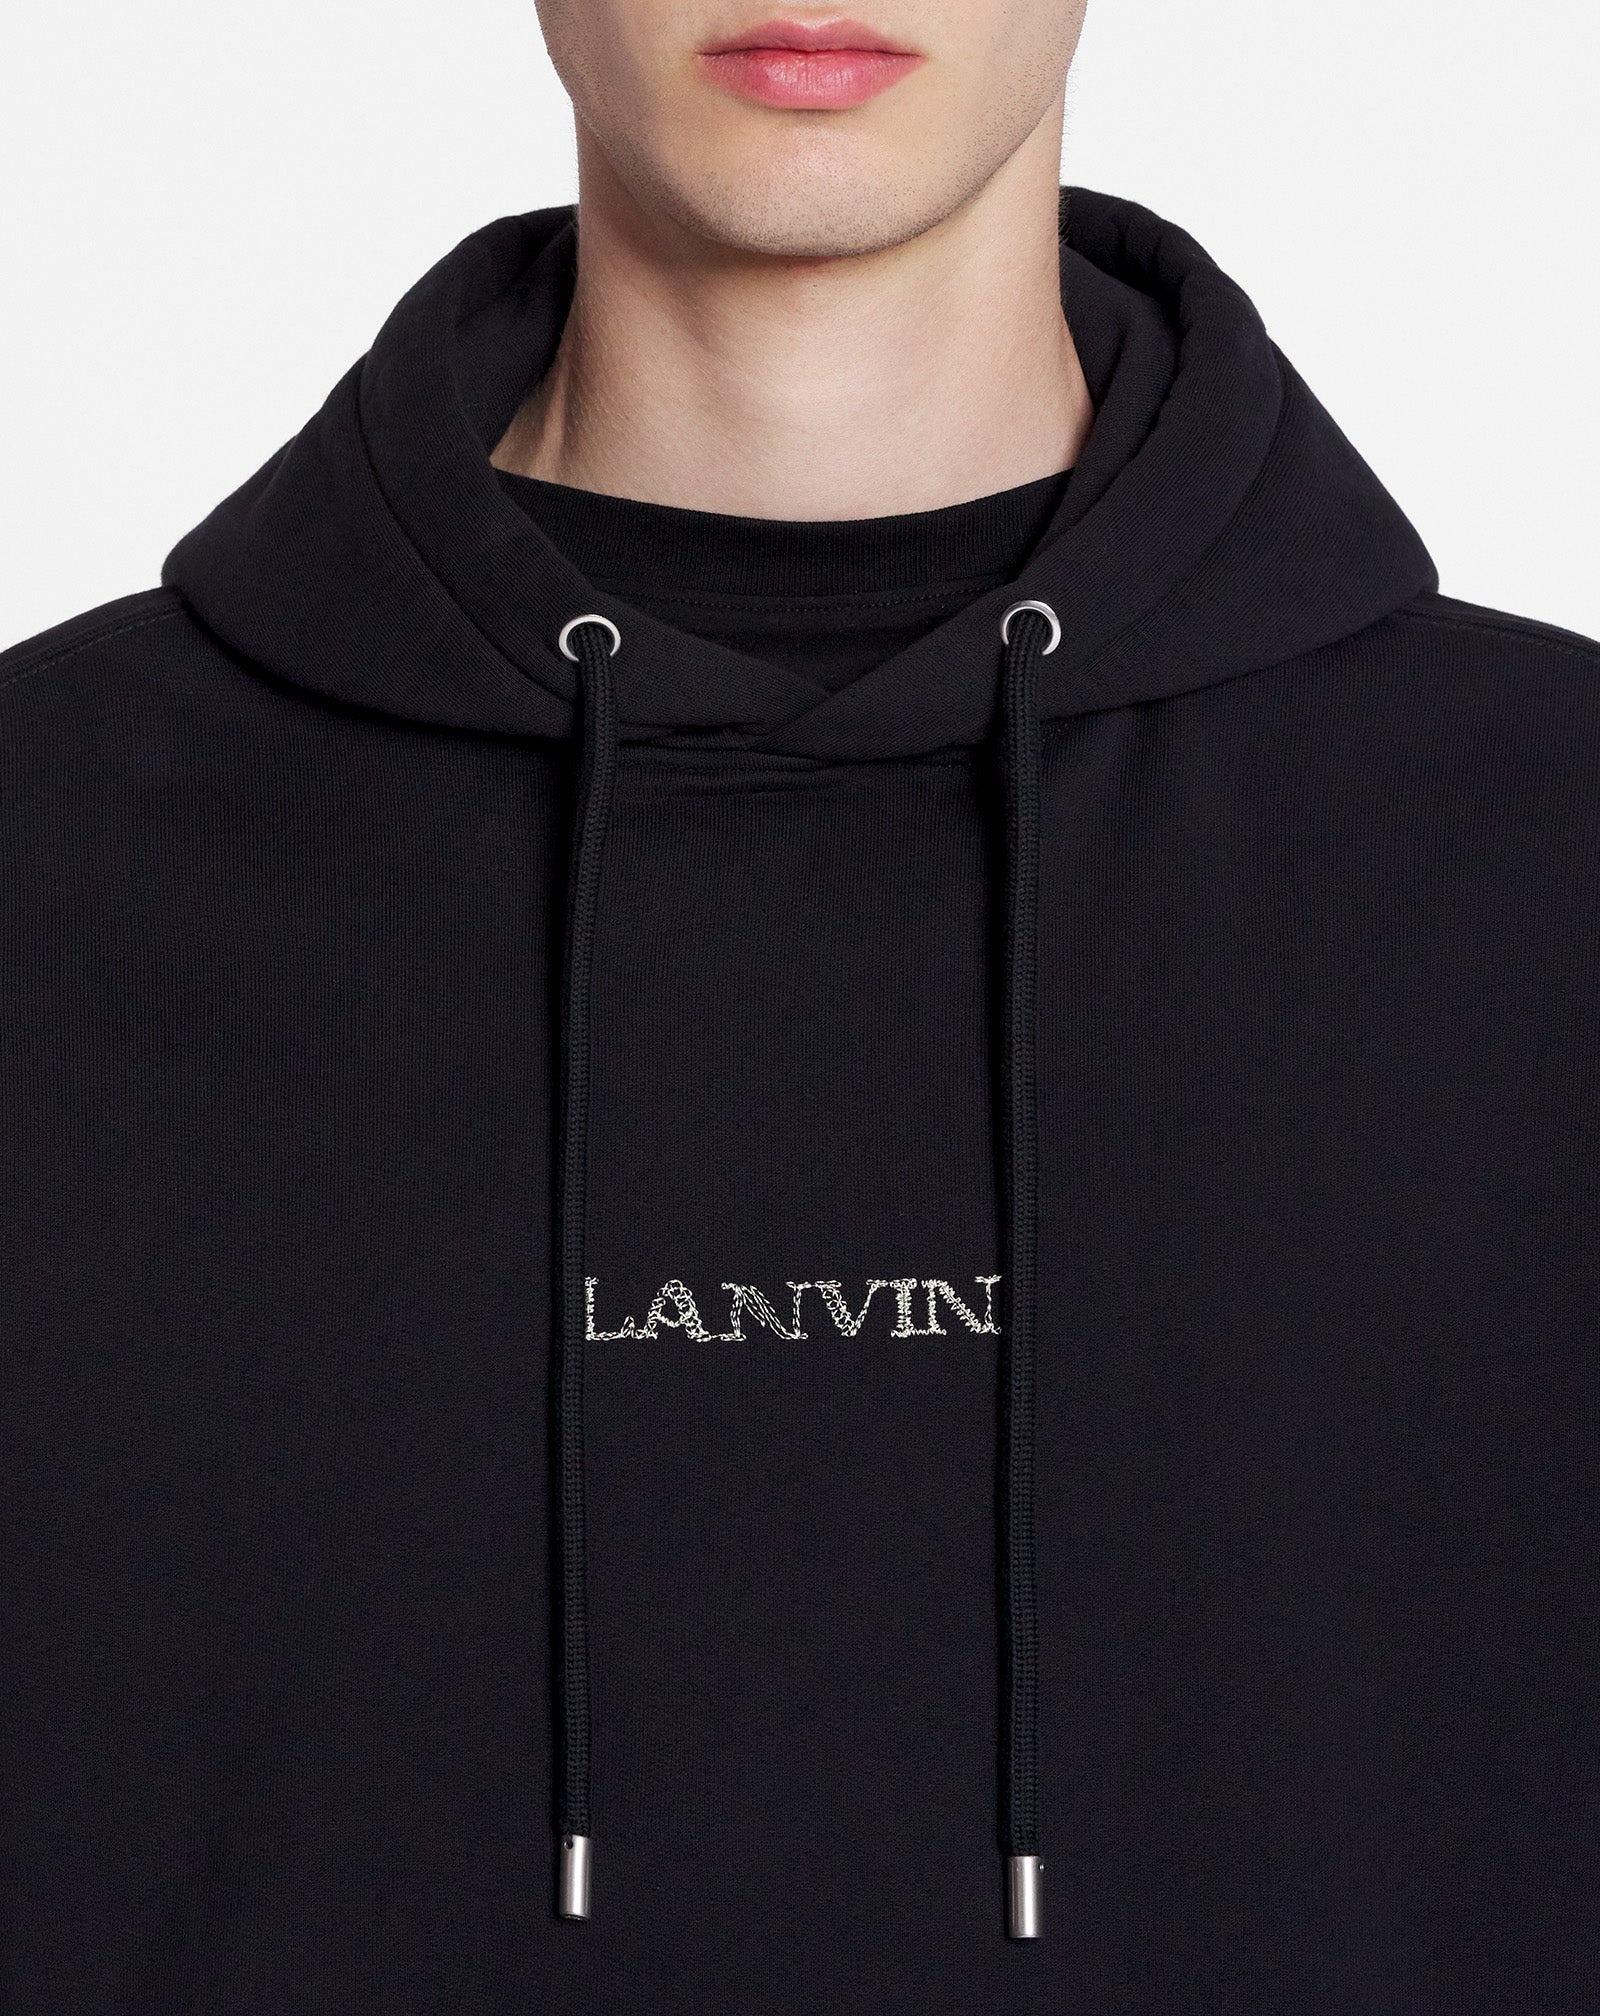 LOOSE-FITTING HOODIE WITH LANVIN LOGO - 7